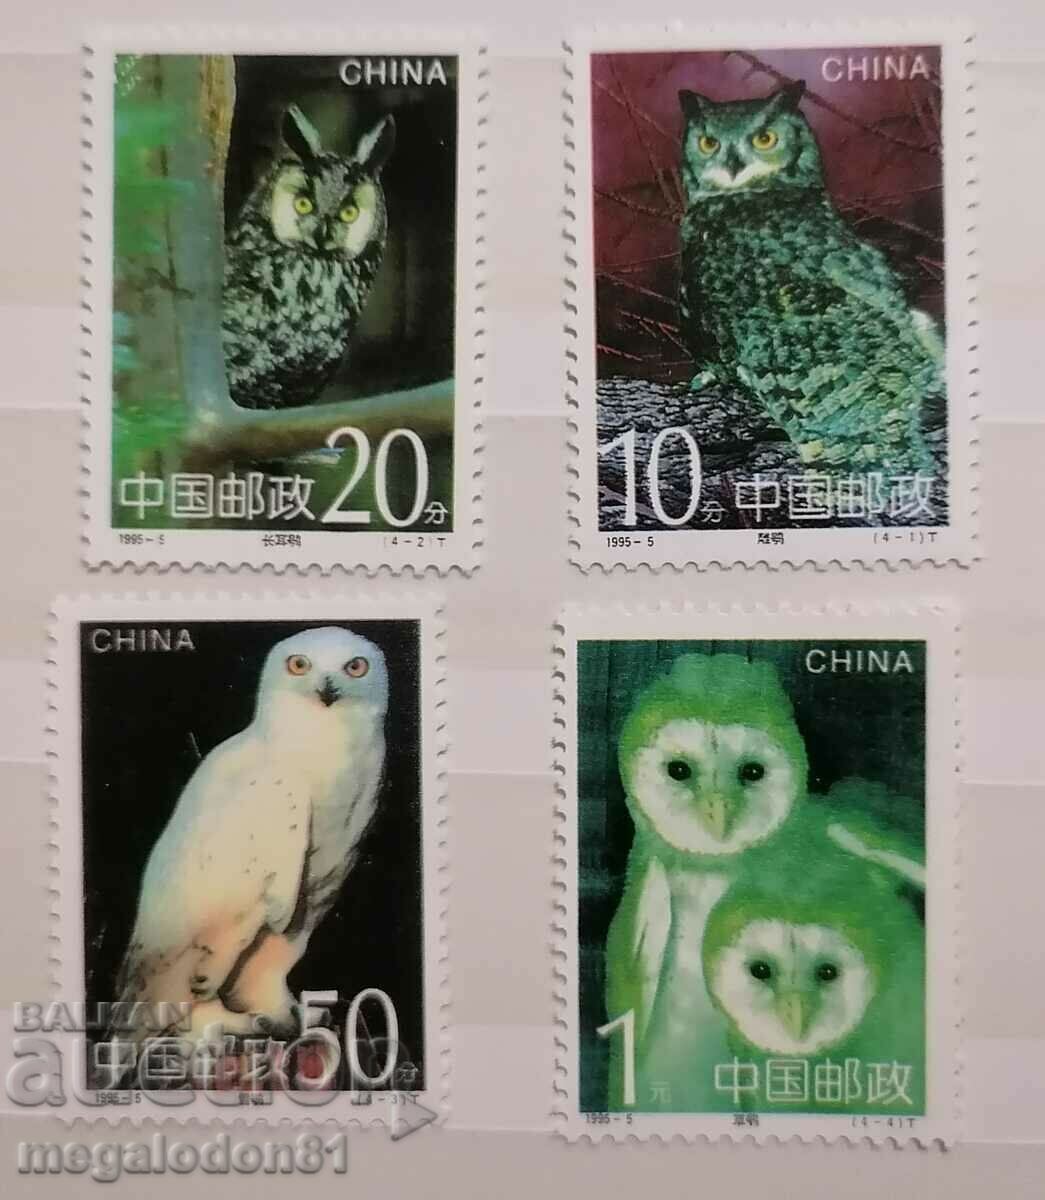 China - nocturnal birds of prey